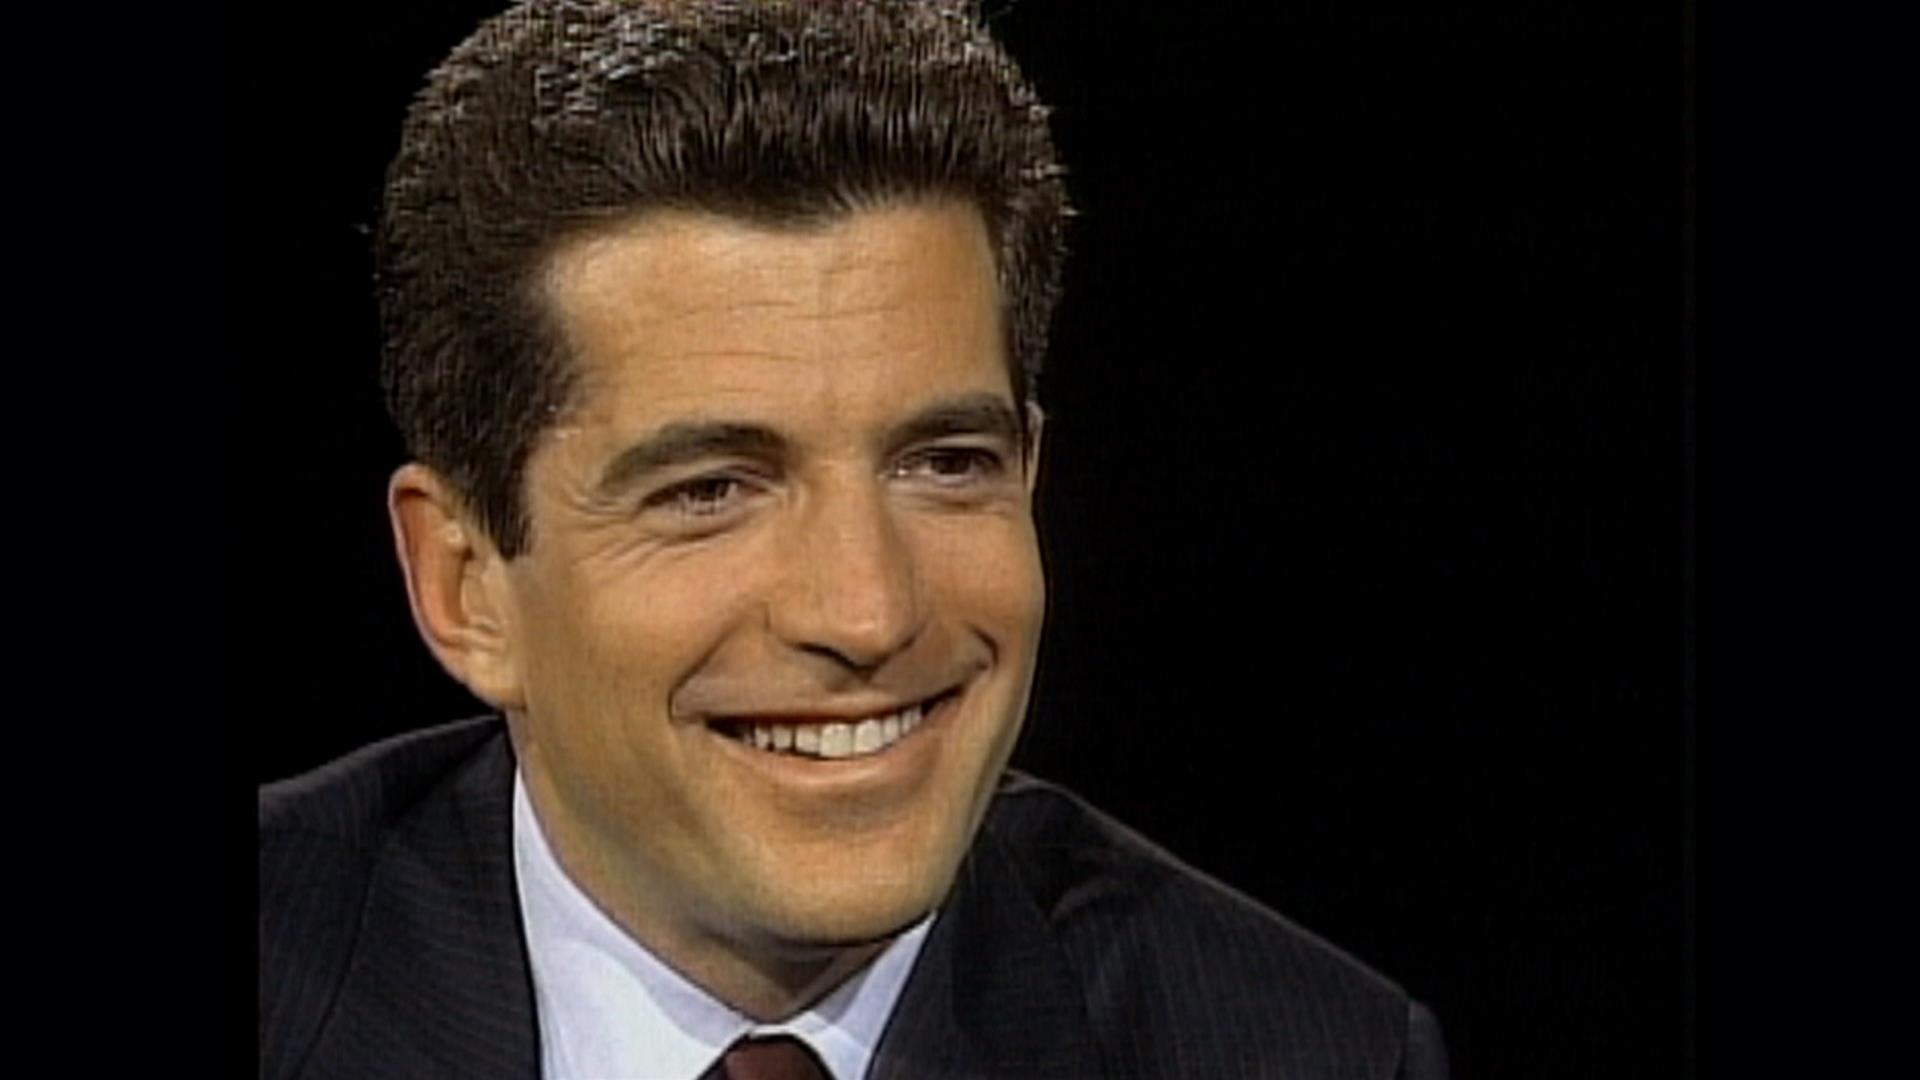 TODAY Flashback: John F. Kennedy Jr. talks family, life with Katie Couric - TODAY.com1920 x 1080